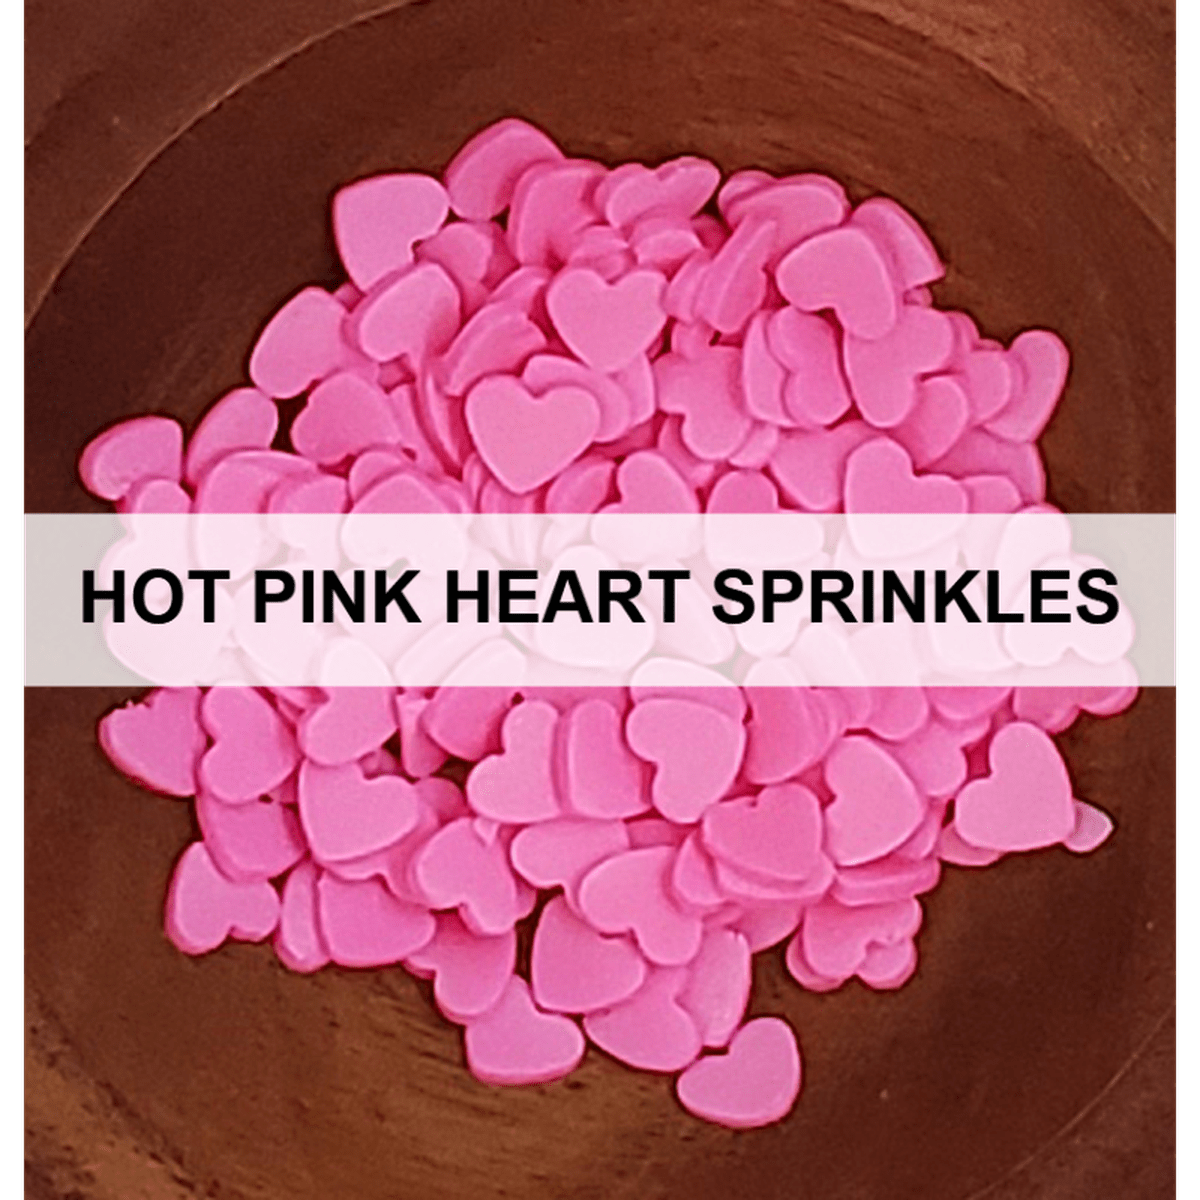 Hot Pink Heart Sprinkles by Kat Scrappiness - Kat Scrappiness